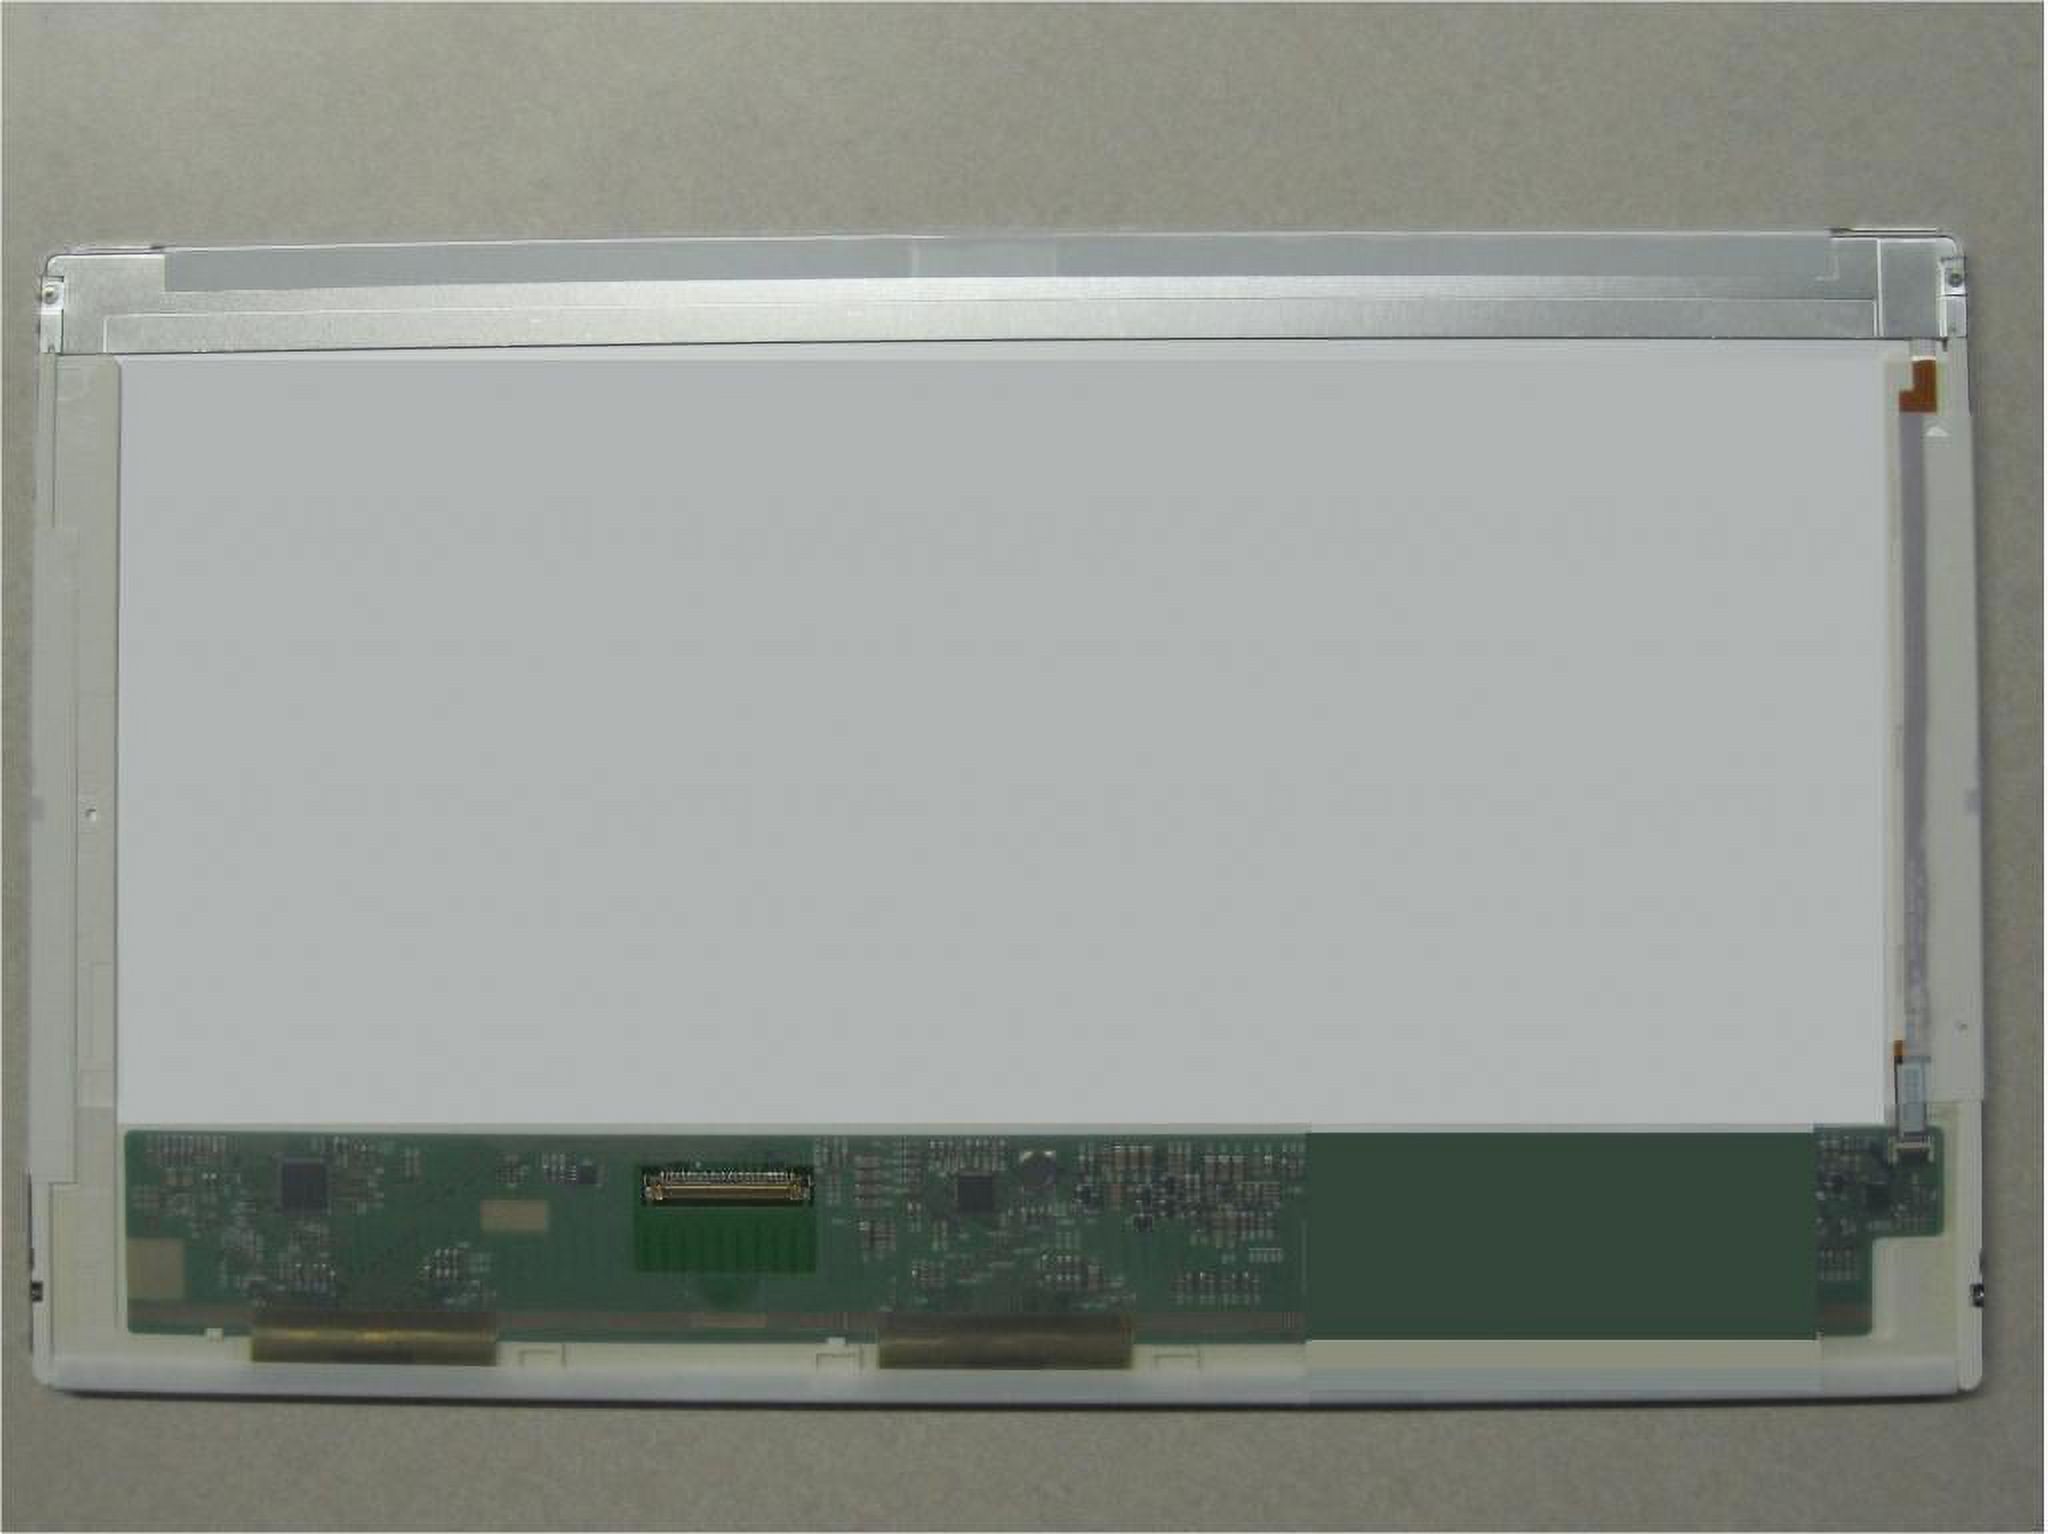 Toshiba Satellite L645d-s4040 Replacement LAPTOP LCD Screen 14.0" WXGA HD LED DIODE (Substitute Replacement LCD Screen Only. Not a Laptop ) - image 1 of 2